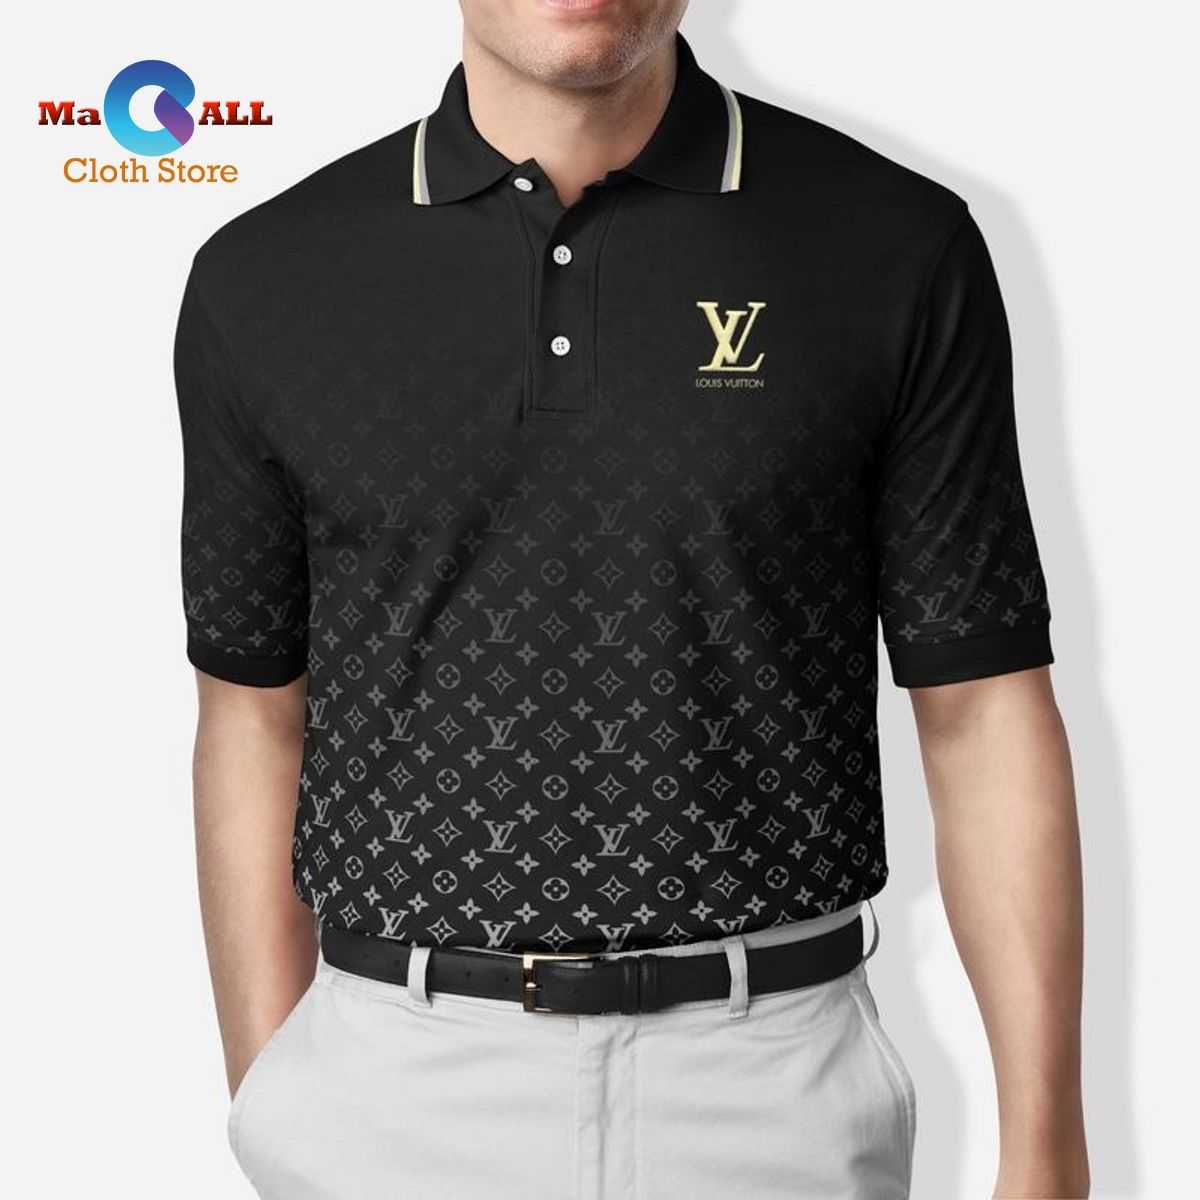 NEW] Louis Vuitton Embossed Pattern Luxury Premium For Men LV Polo Shirt -  Macall Cloth Store - Destination for fashionistas